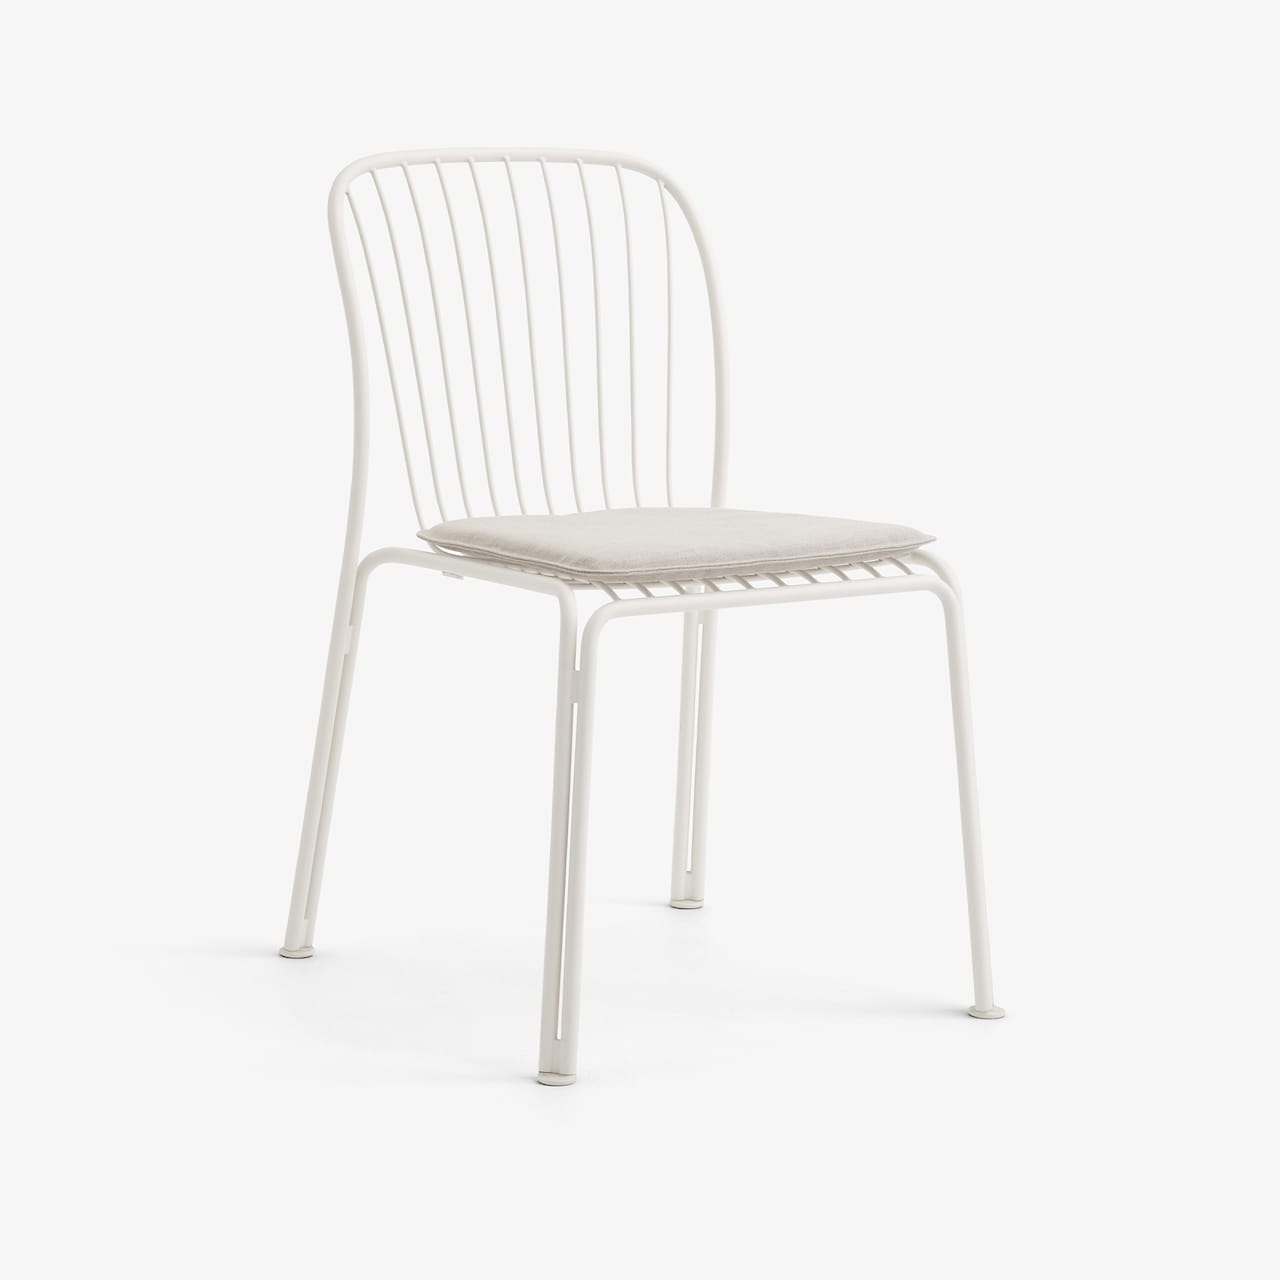 Thorvald Chair SC94/SC95 Seat Pad